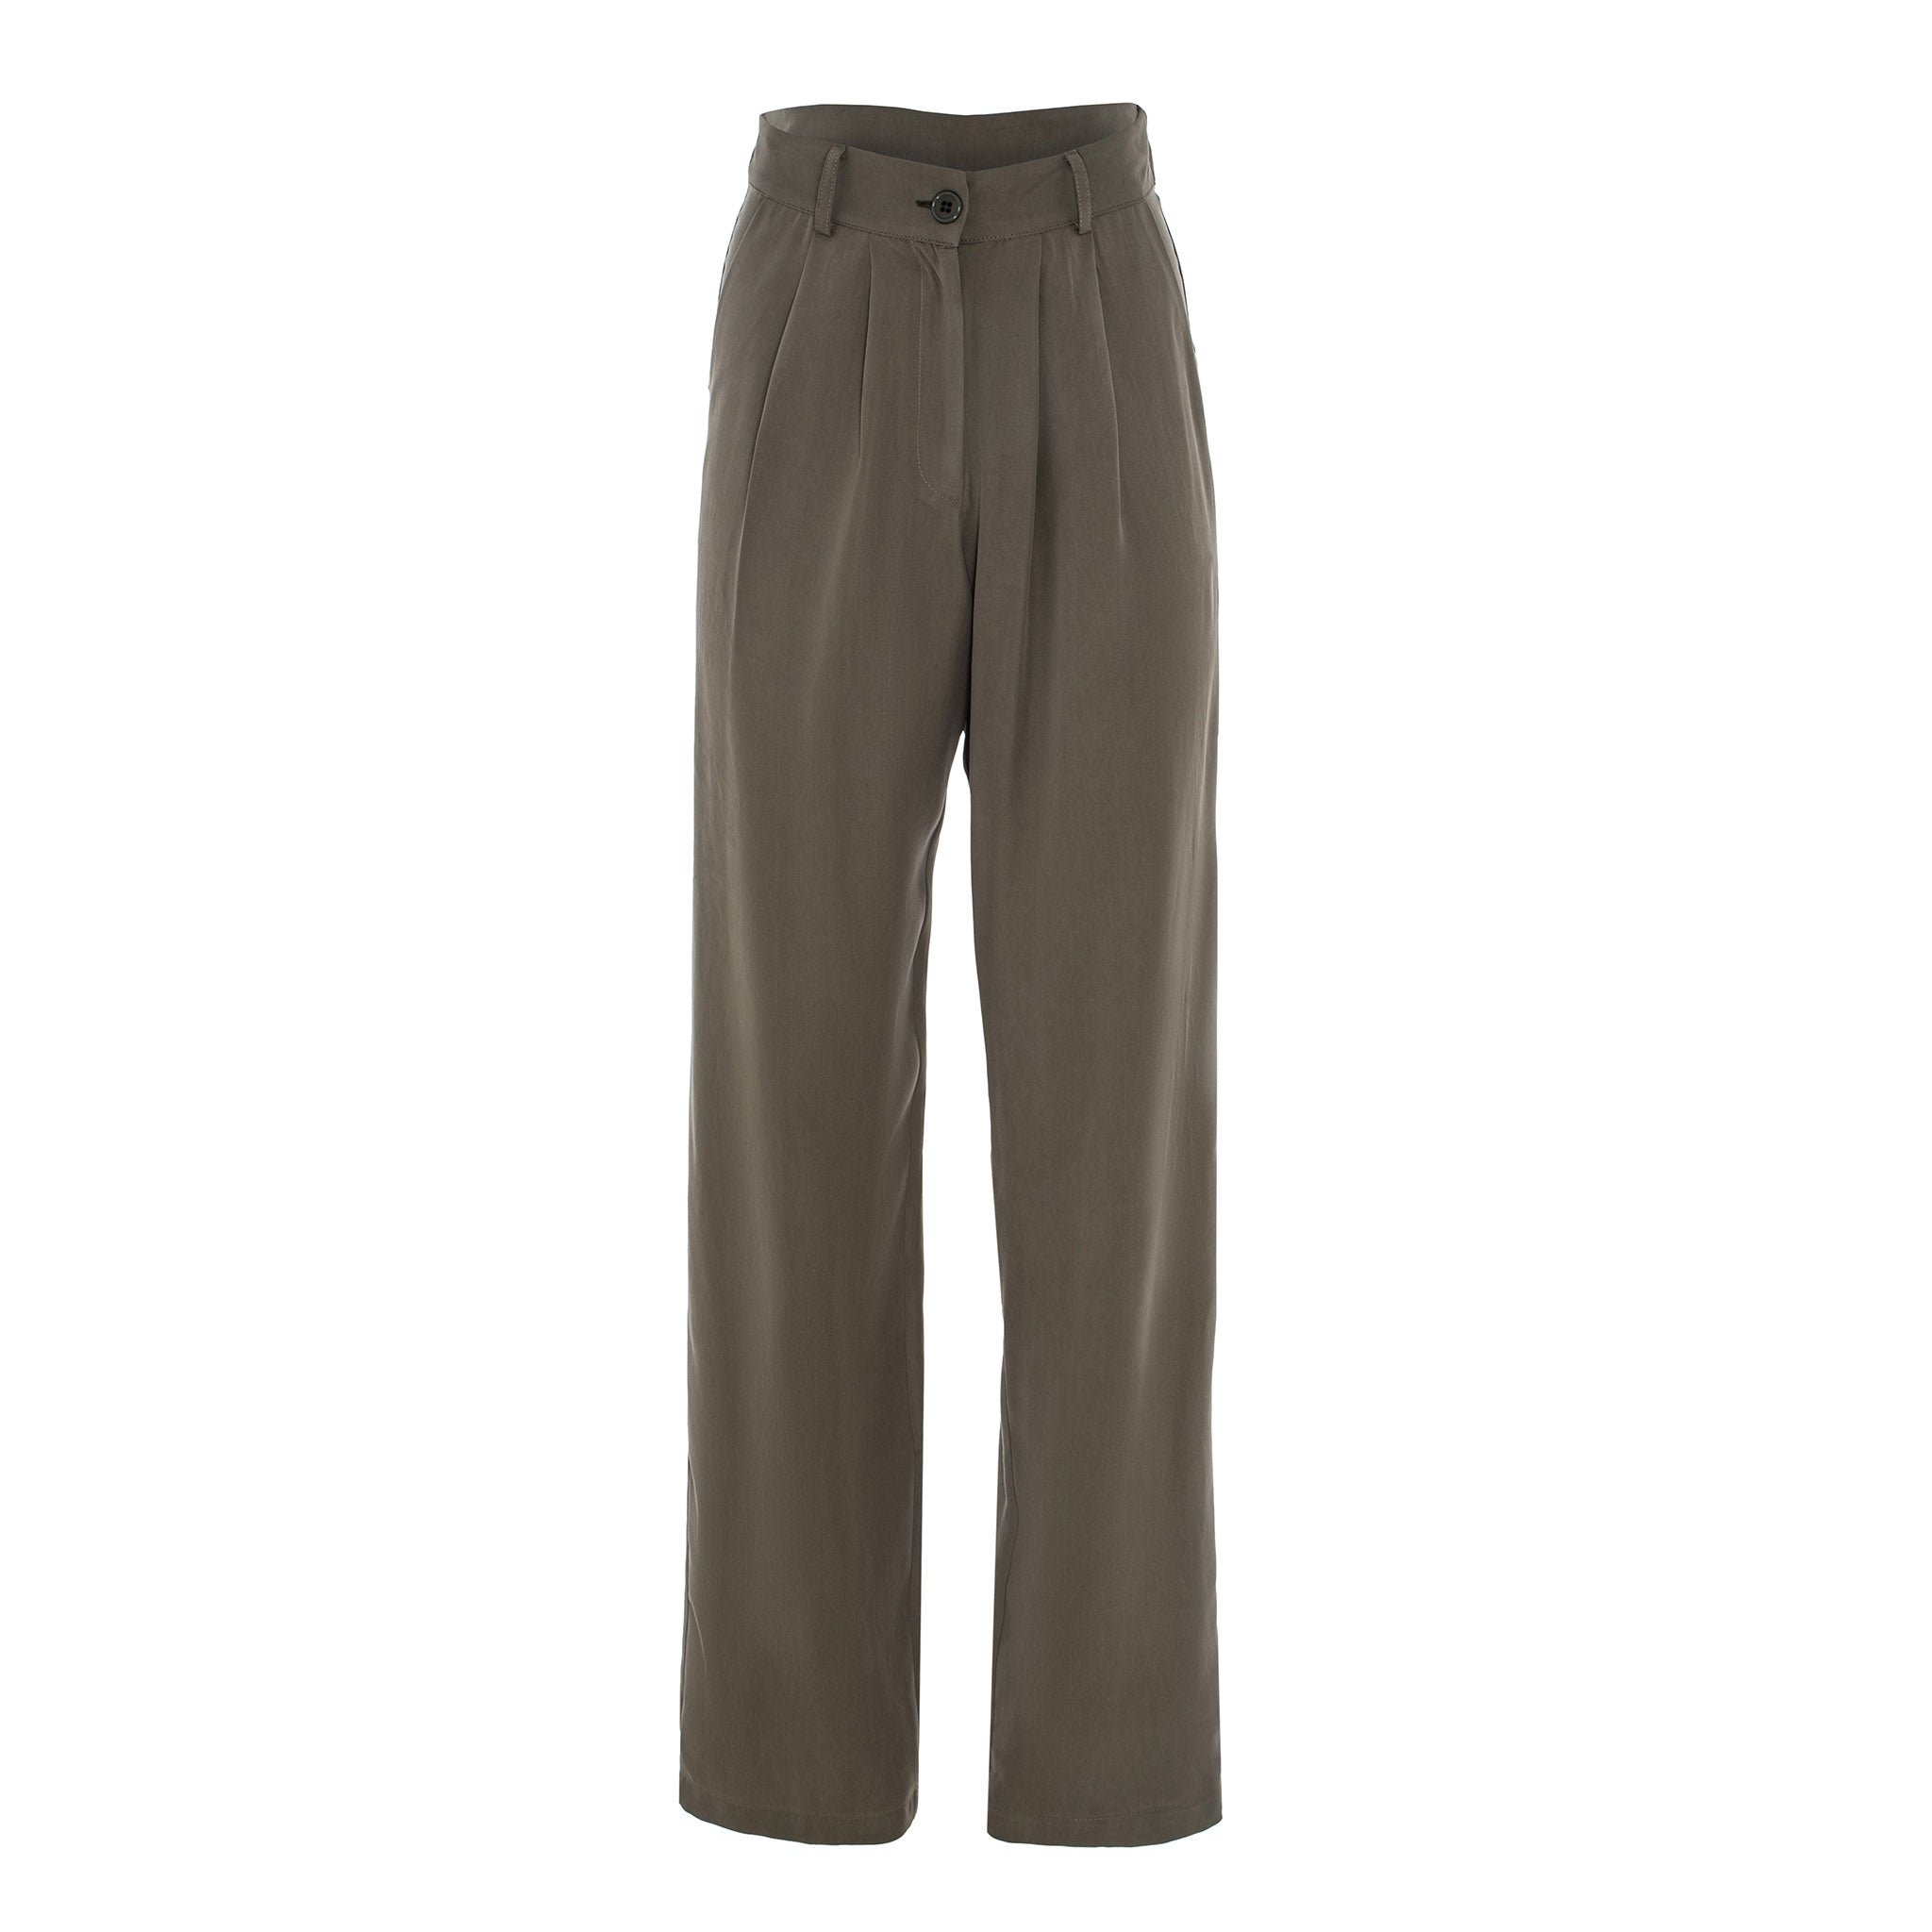 FULL LENGTH TROUSERS IN OLIVE GREEN